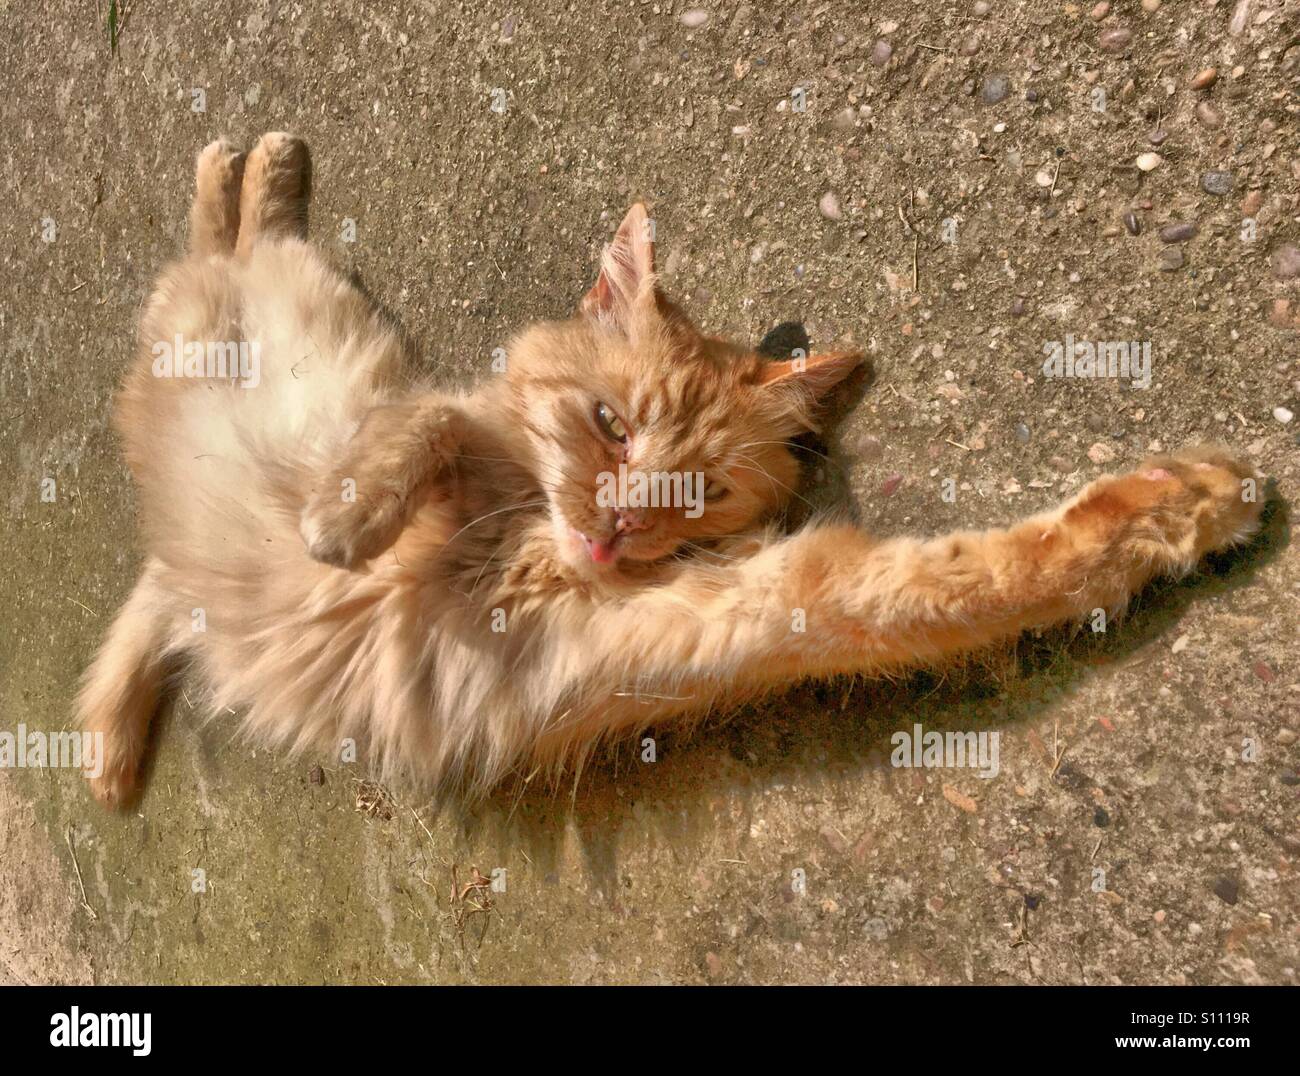 Ginger cat laying on the floor stretching in what looks like a superman pose with its tongue out Stock Photo